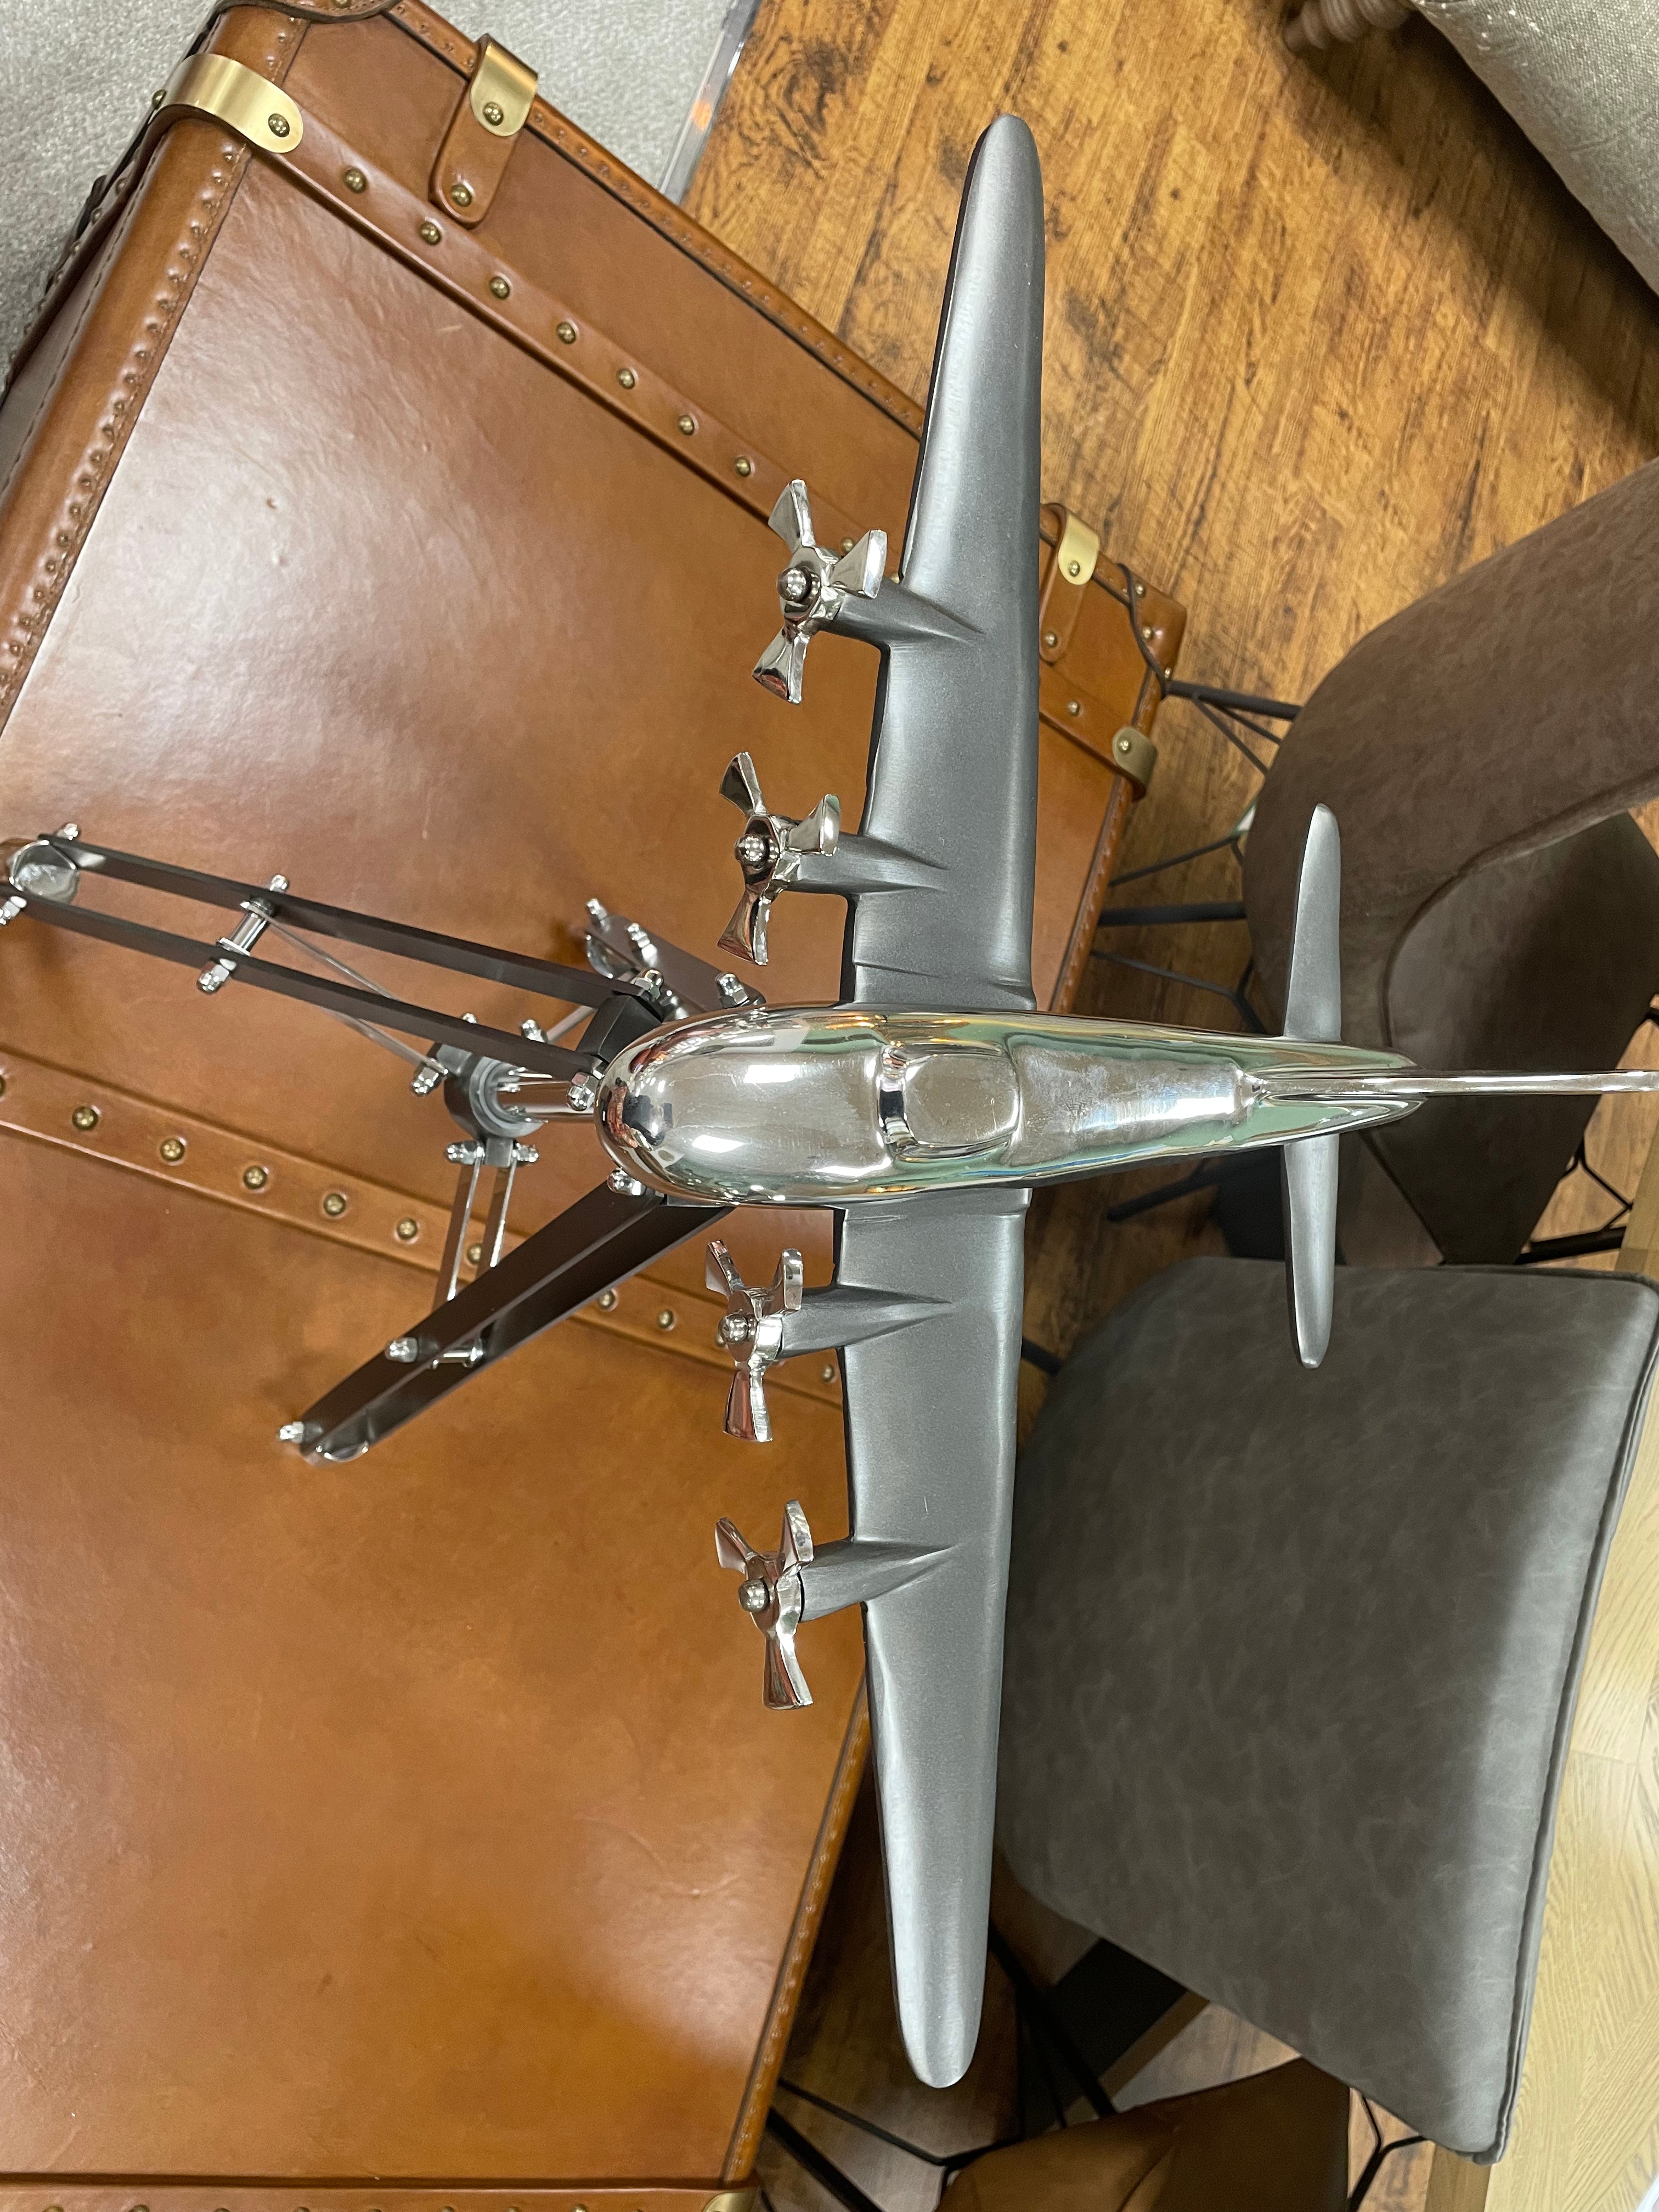 Stainless Steel Fighter Plane On Tripod Stand